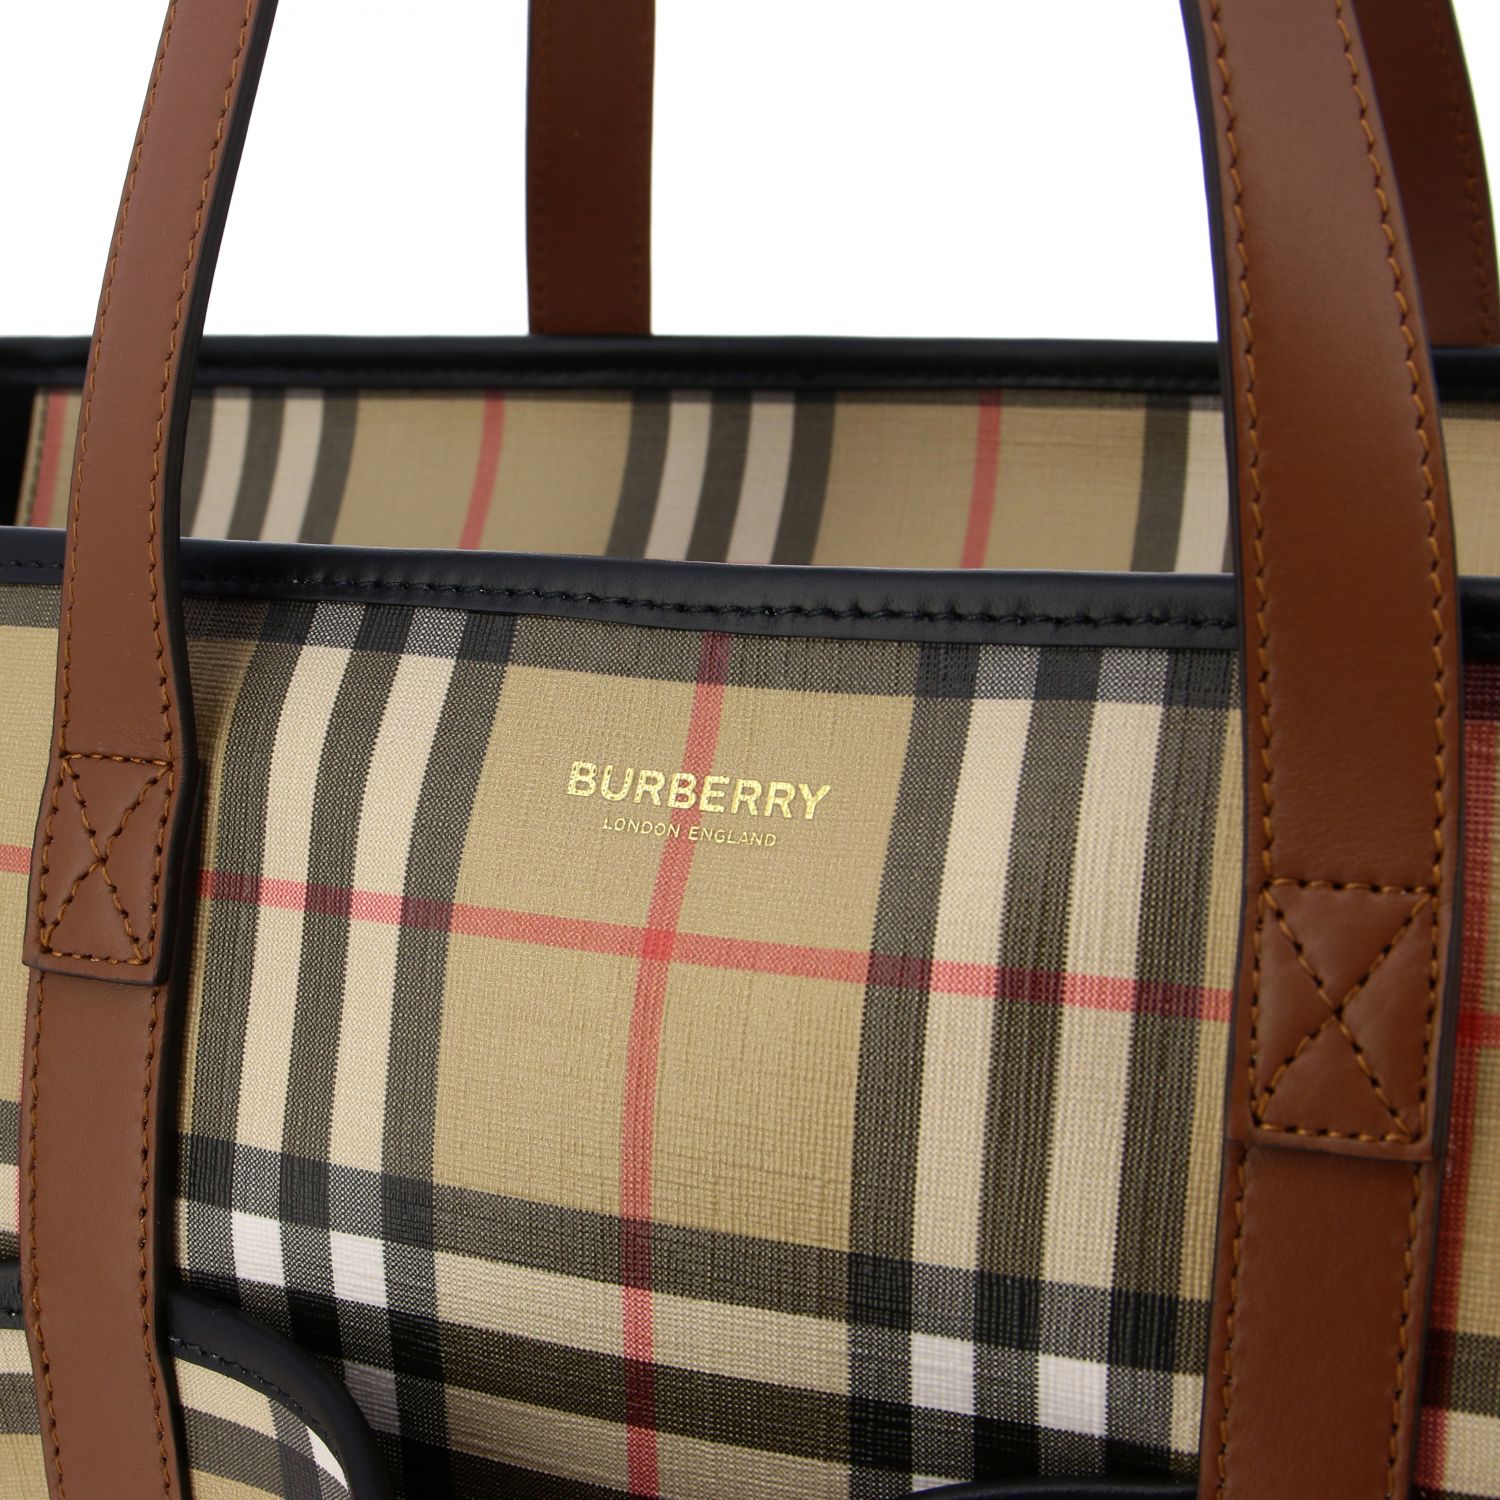 Burberry Outlet: Mama's bag in check leather with logo - Beige ...